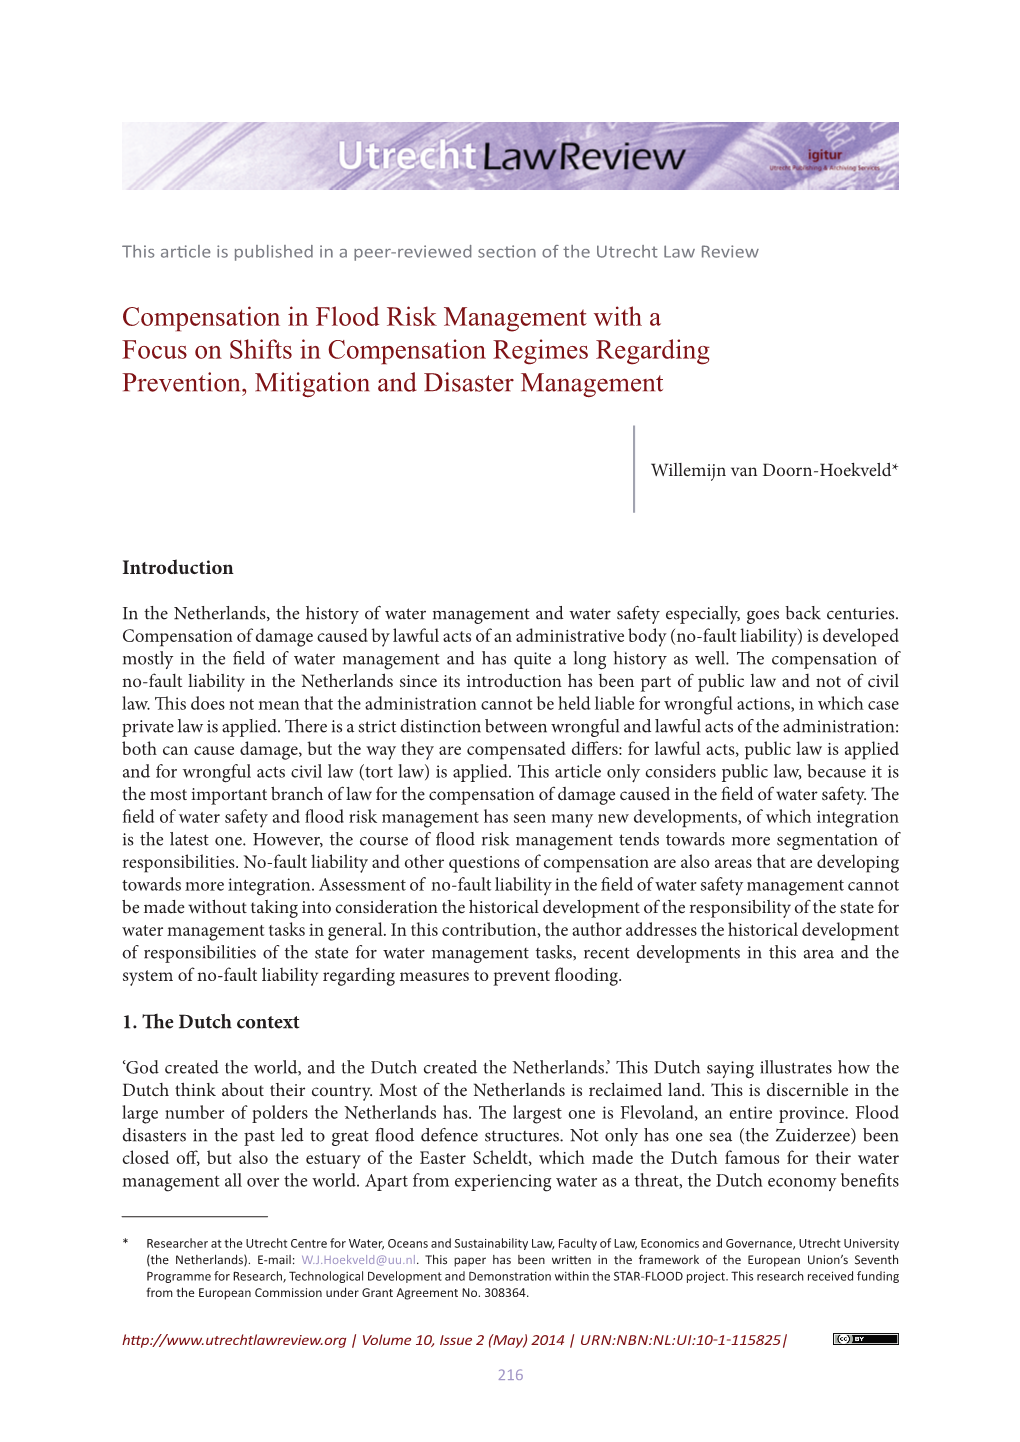 Compensation in Flood Risk Management with a Focus on Shifts in Compensation Regimes Regarding Prevention, Mitigation and Disaster Management